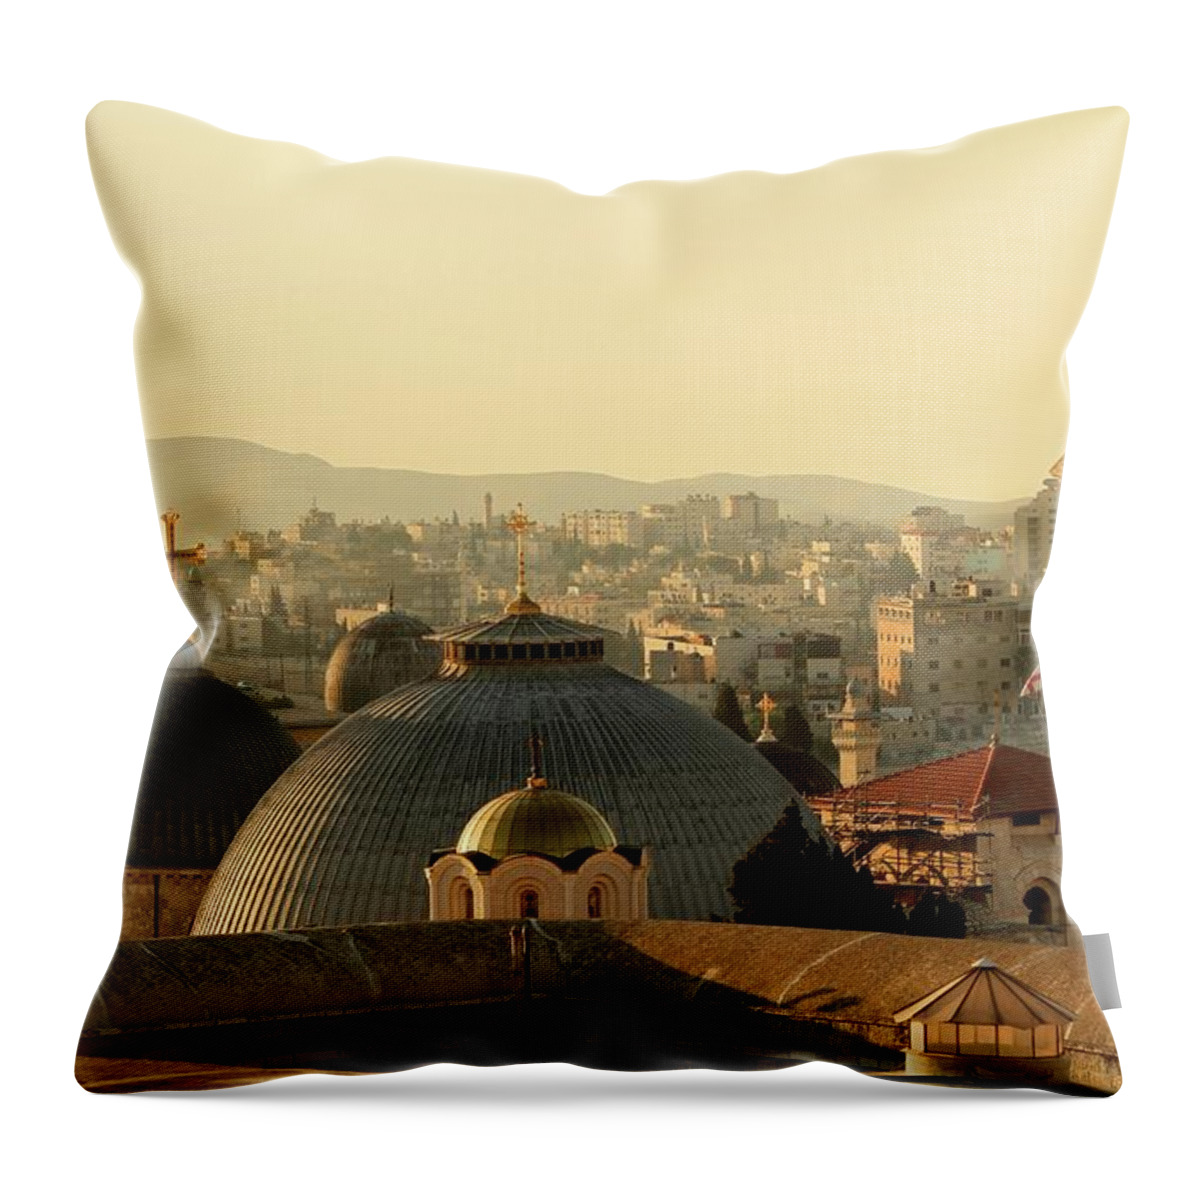 West Bank Throw Pillow featuring the photograph Jerusalem Churches On The Skyline by Picturejohn